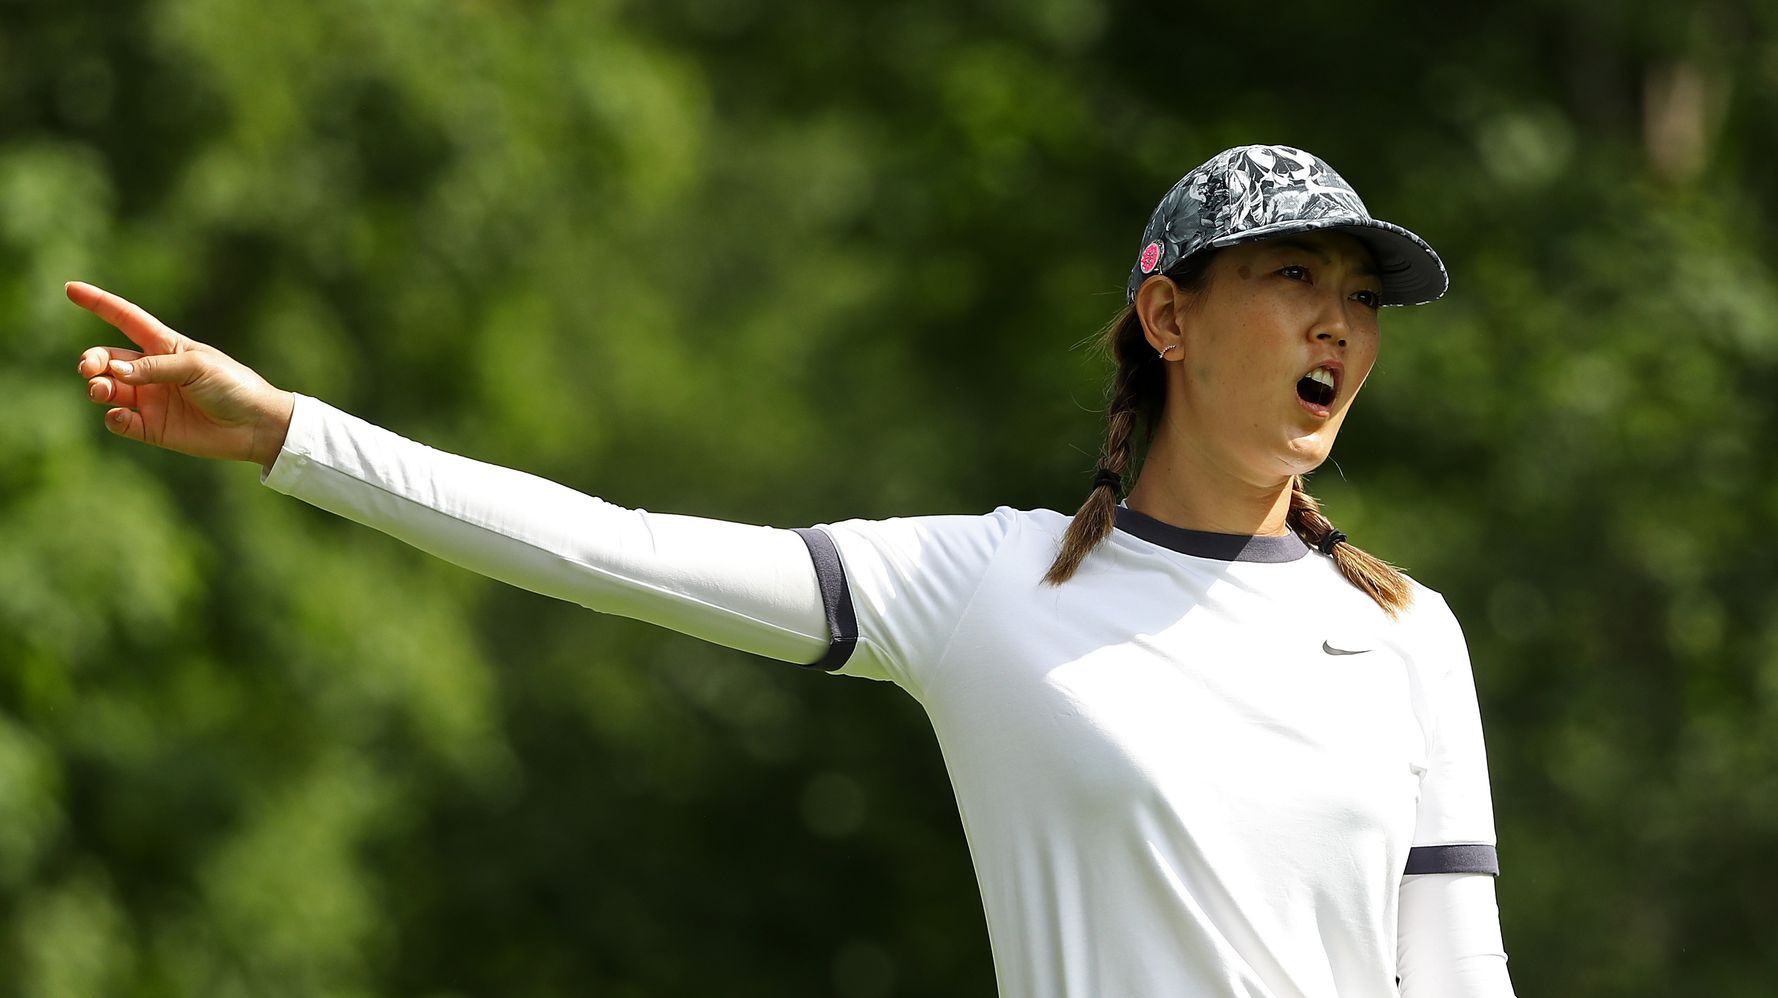 www.huffpost.com: Pro Golfer Michelle Wie Disgusted By Rudy Giuliani's Creepy Story About Her 'Panties'